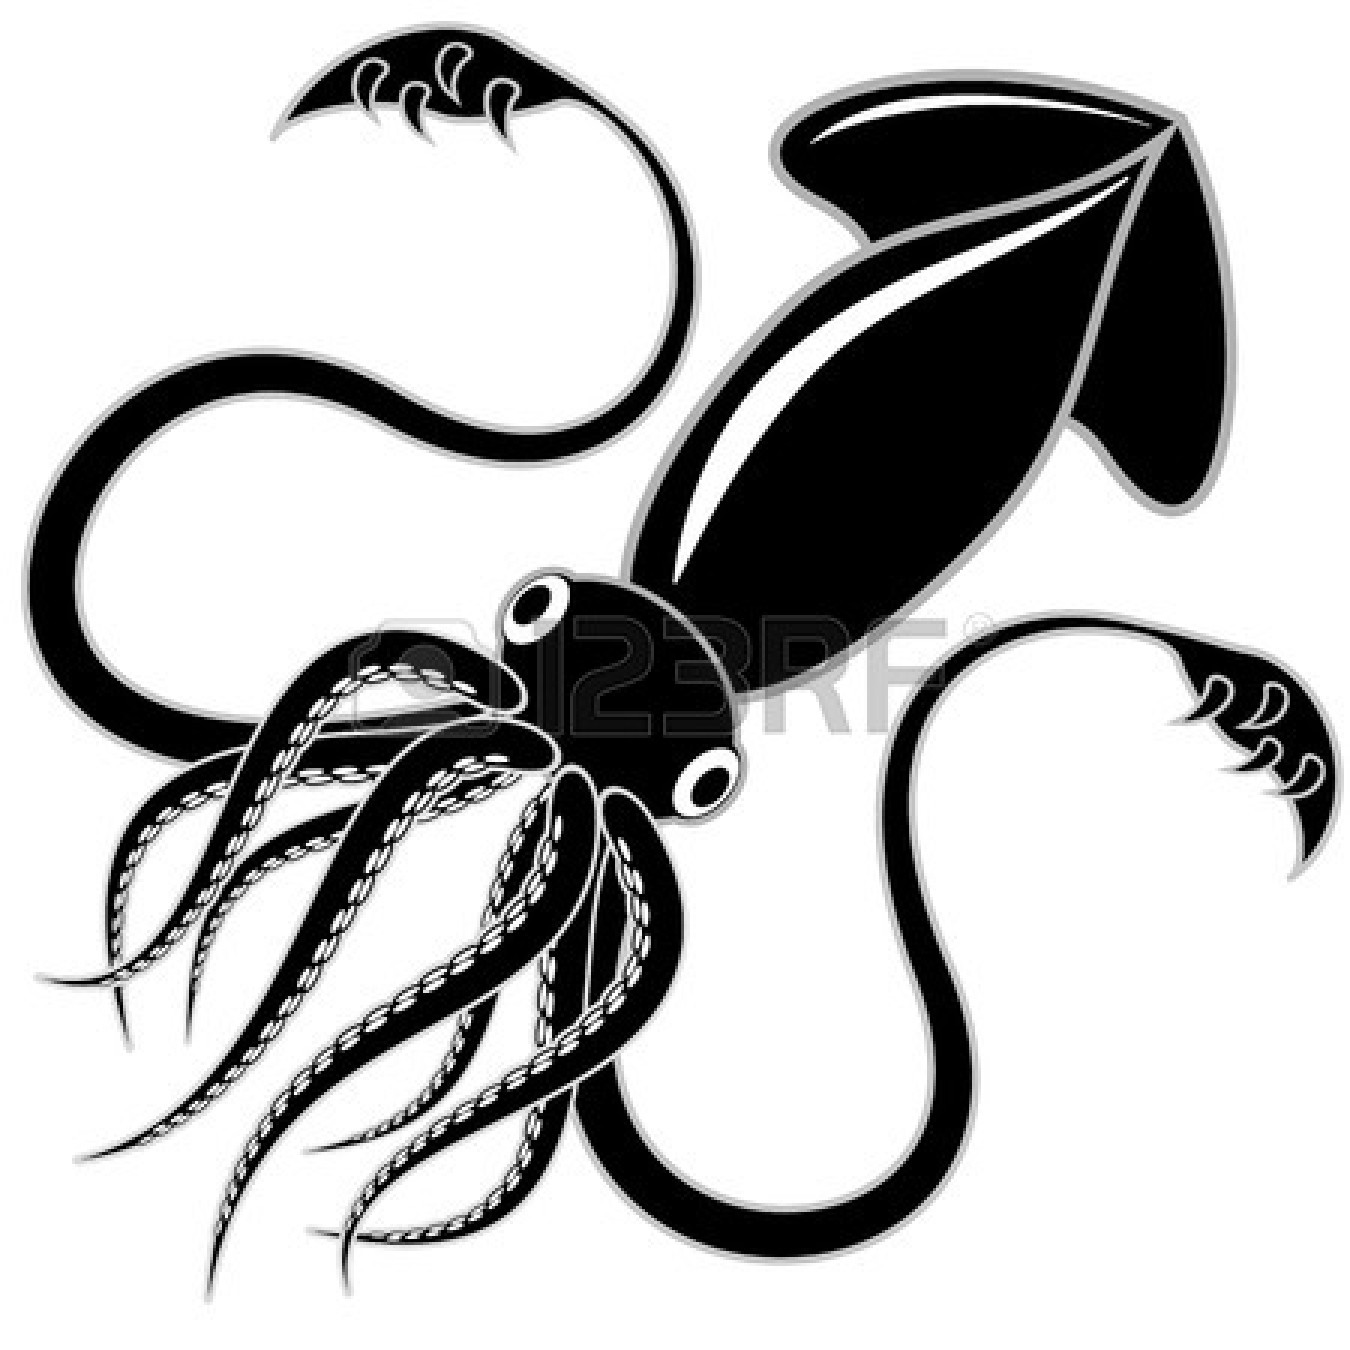 Squid Silhouette   Clipart Panda   Free Clipart Images